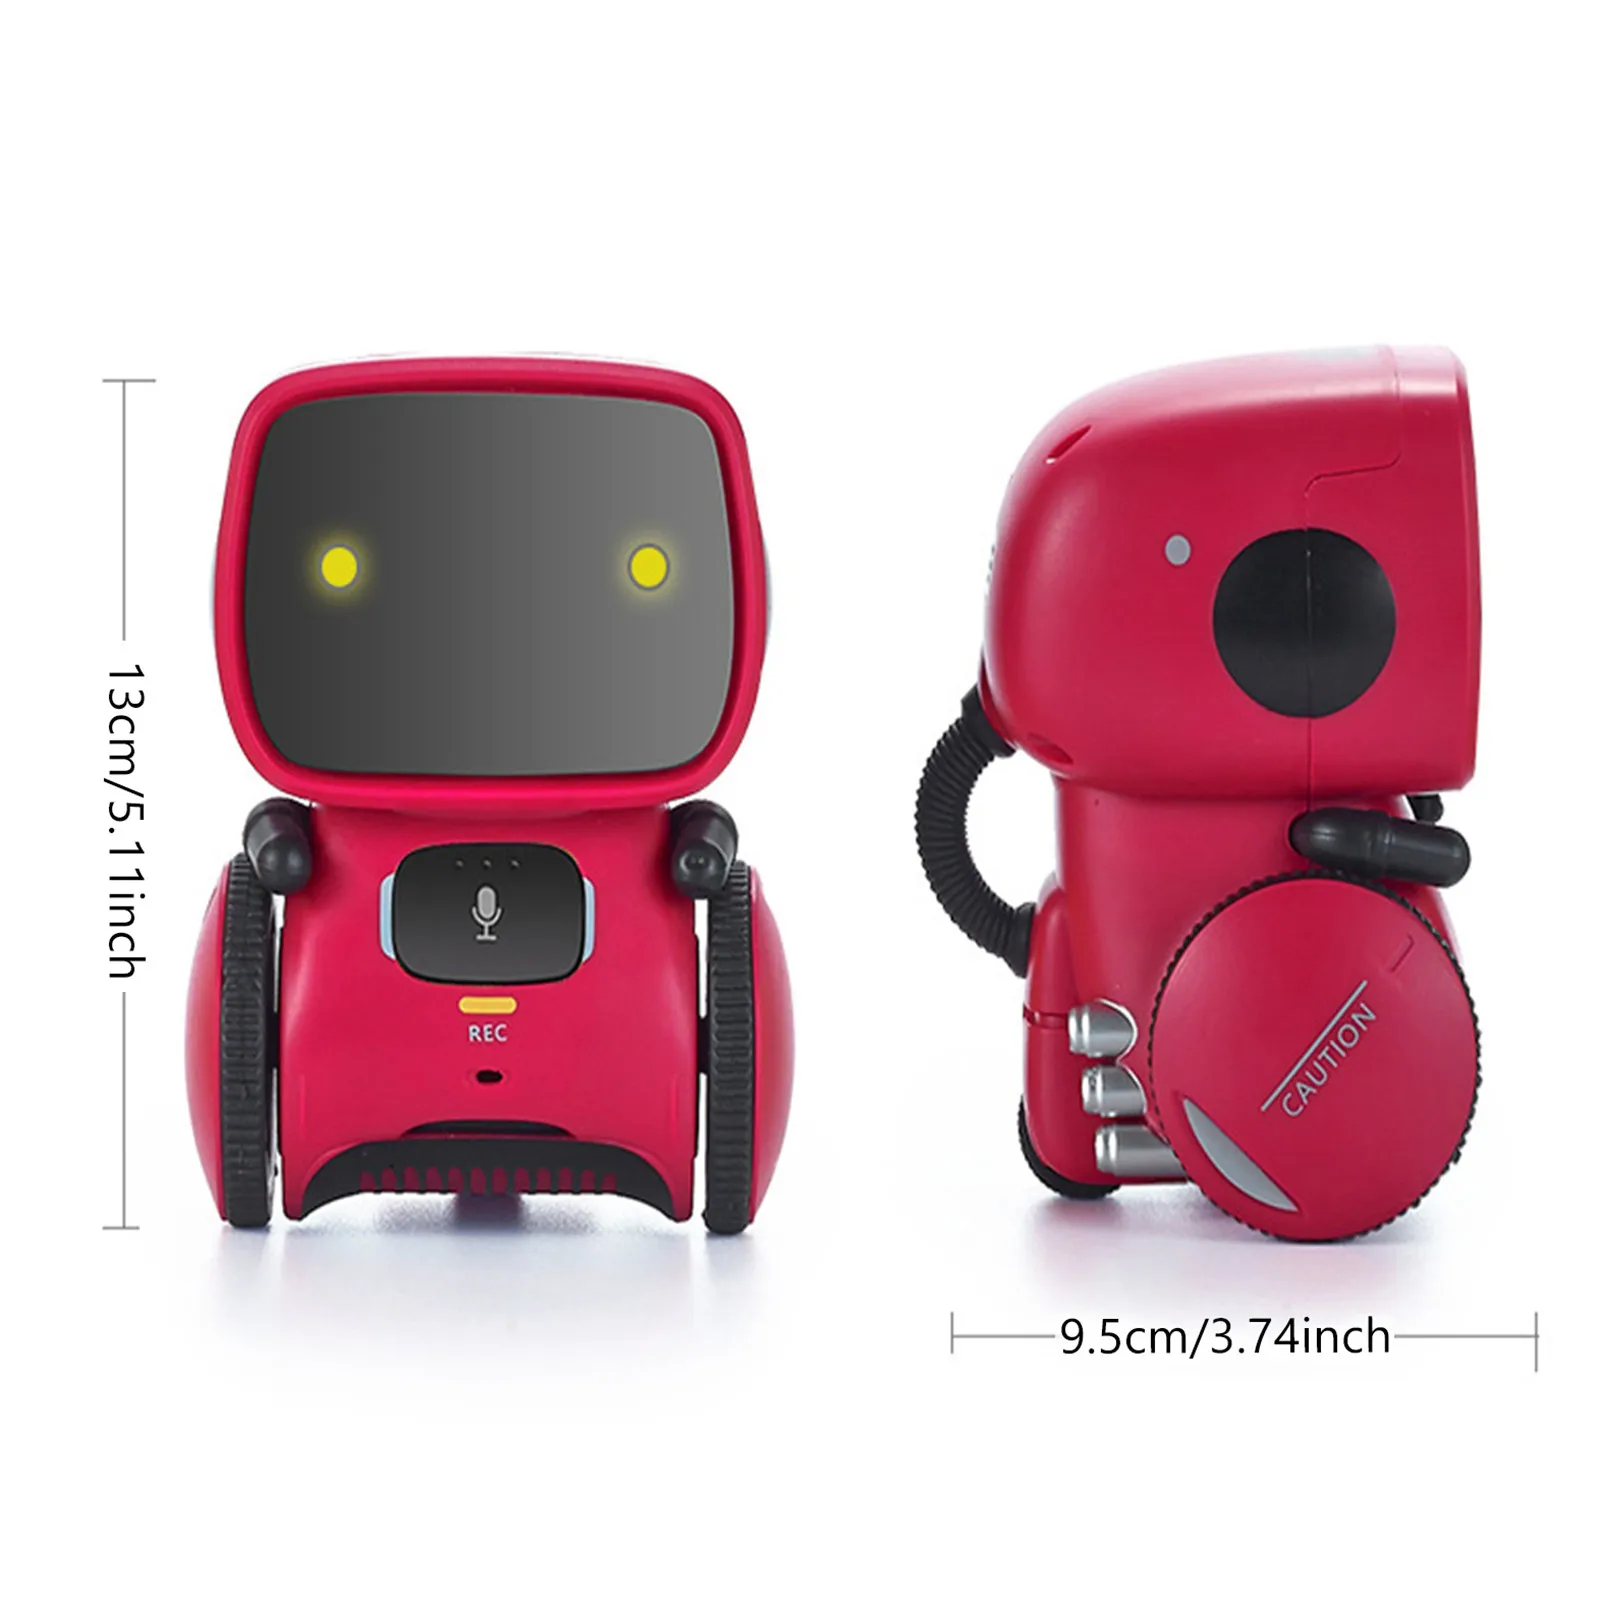 newest type smart robots dance voice command 3 languages versions touch control toys interactive robot toy gift for children free global shipping